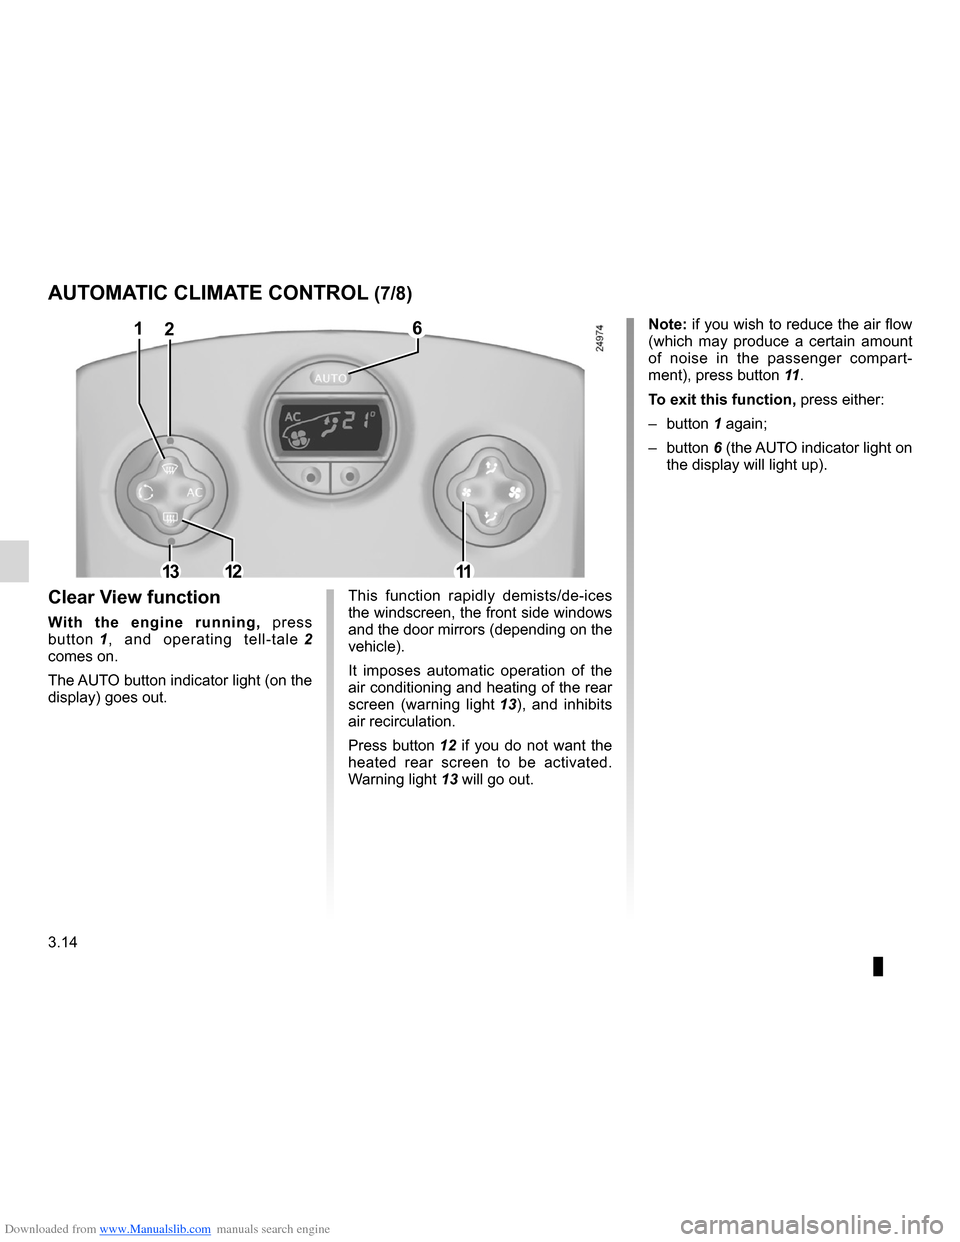 RENAULT CLIO 2012 X85 / 3.G Owners Manual Downloaded from www.Manualslib.com manuals search engine demistingwindscreen  ....................................................... (current page)
3.14
ENG_UD19787_3
Air conditionné automatique (X8